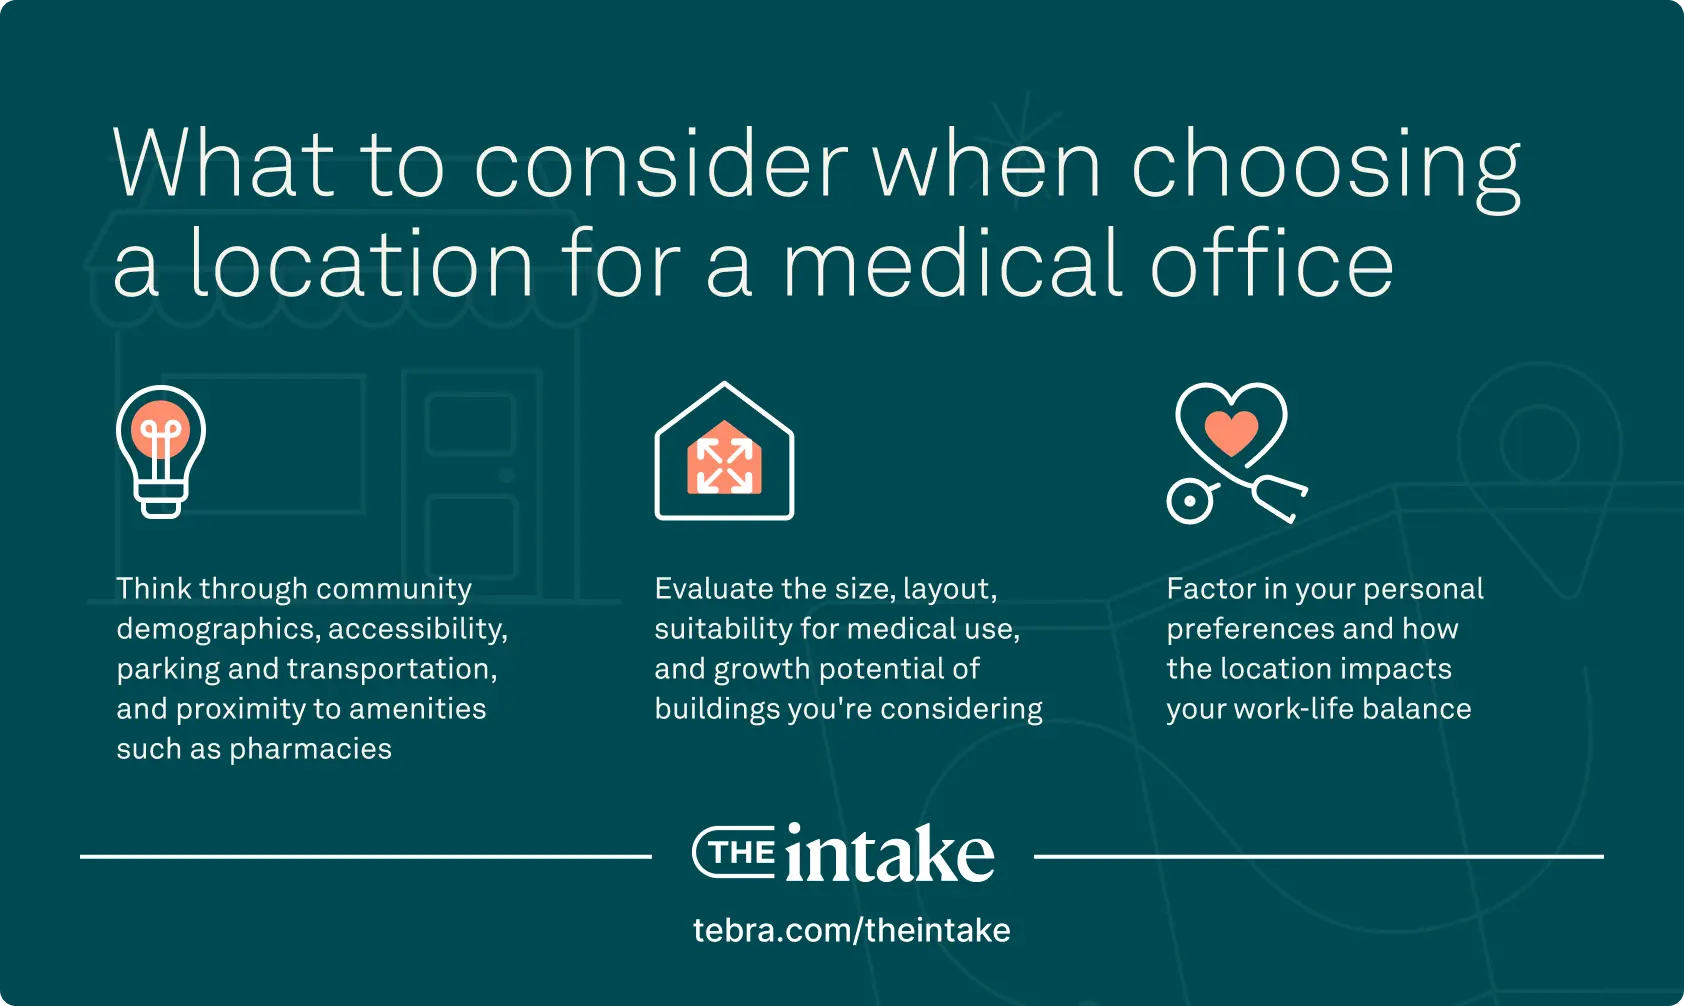 How to choose a location for medical office